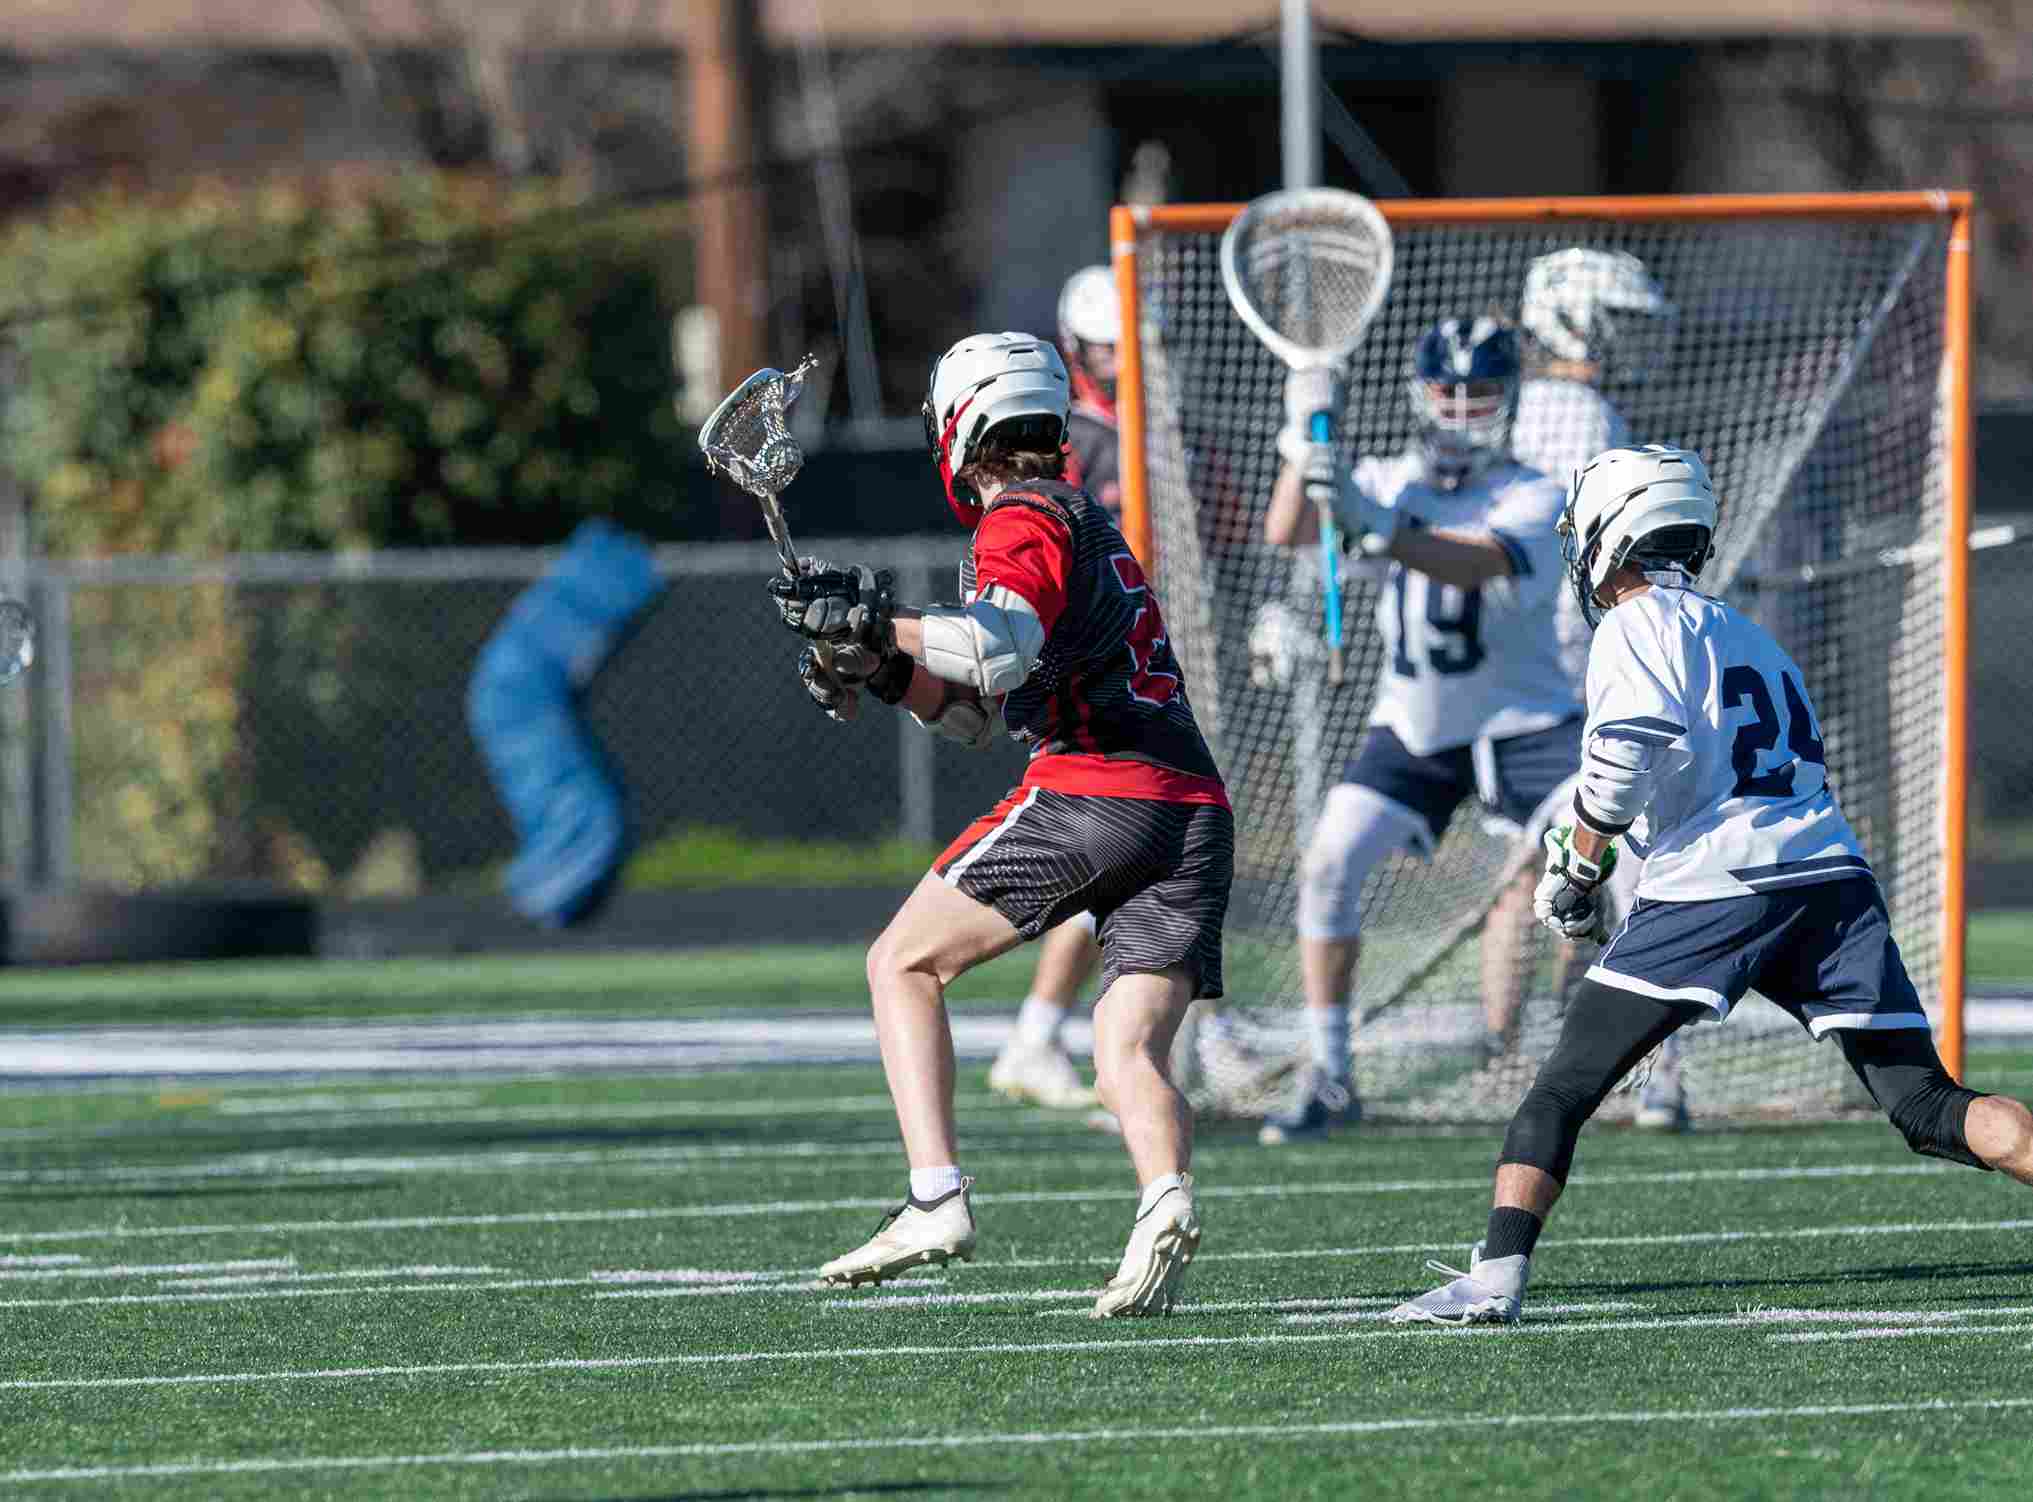 Patrick Tighe's son playing lacrosse